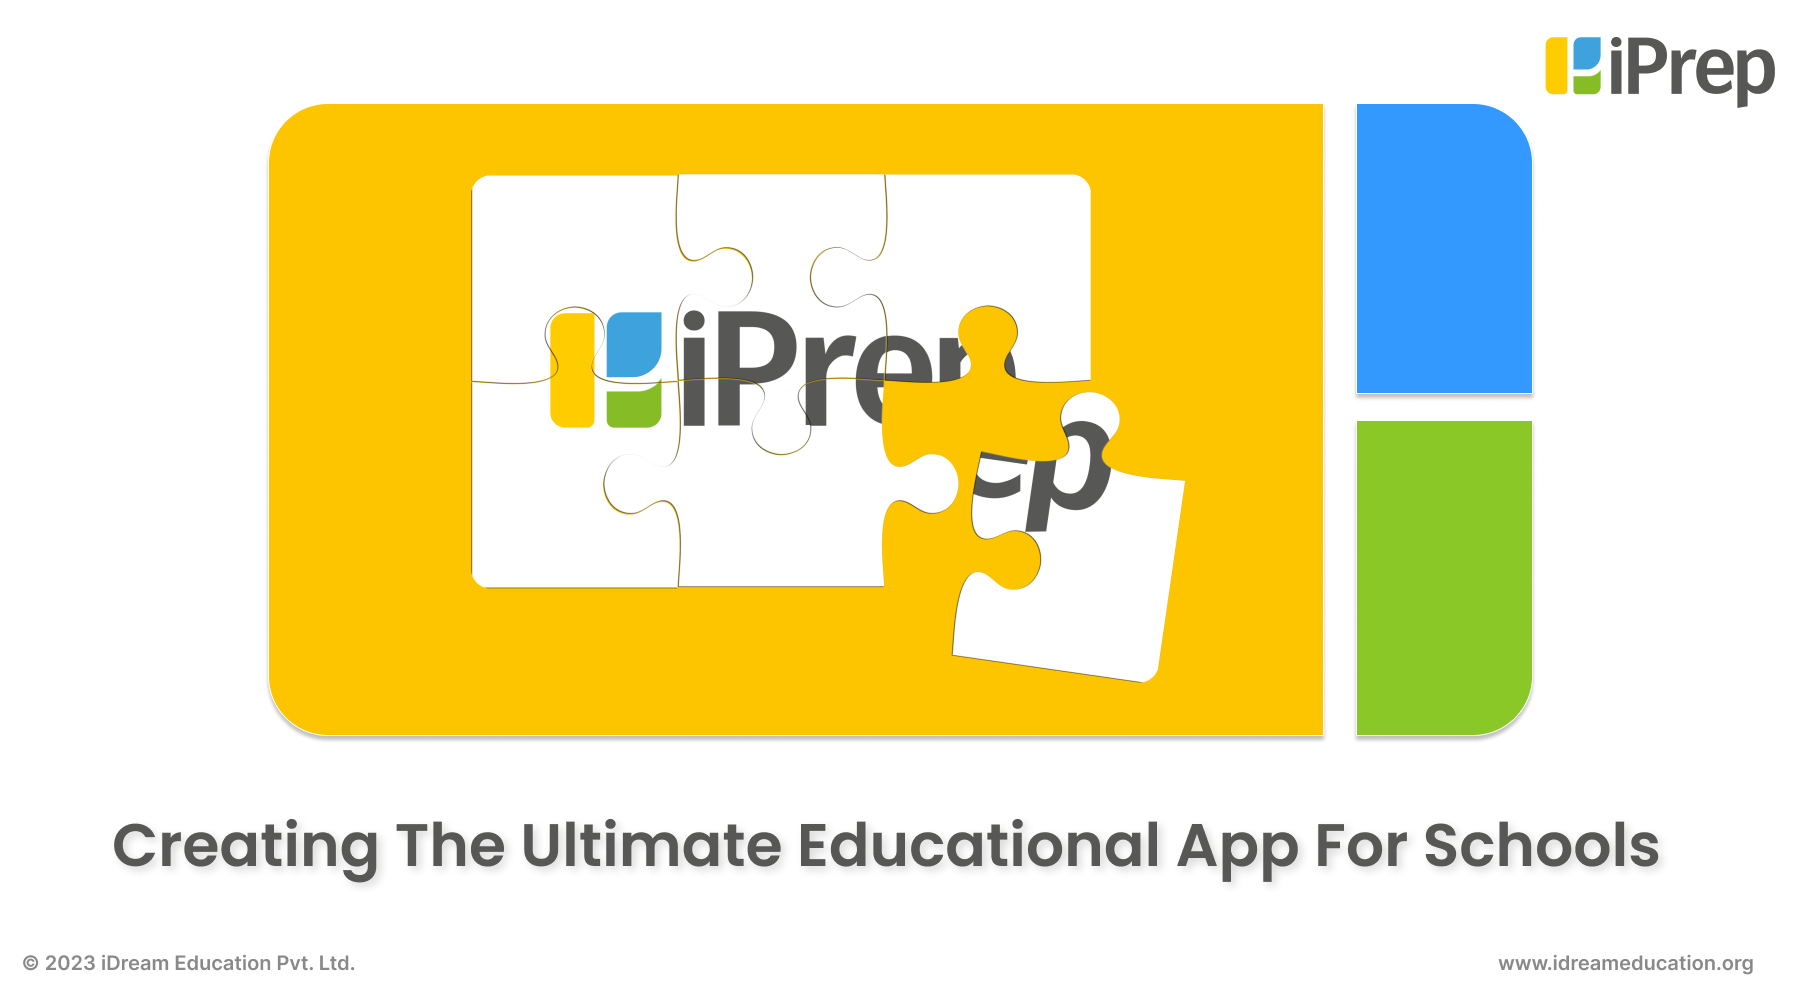 A visual depicting the creation of iPrep - an ultimate one-stop educational app for schools